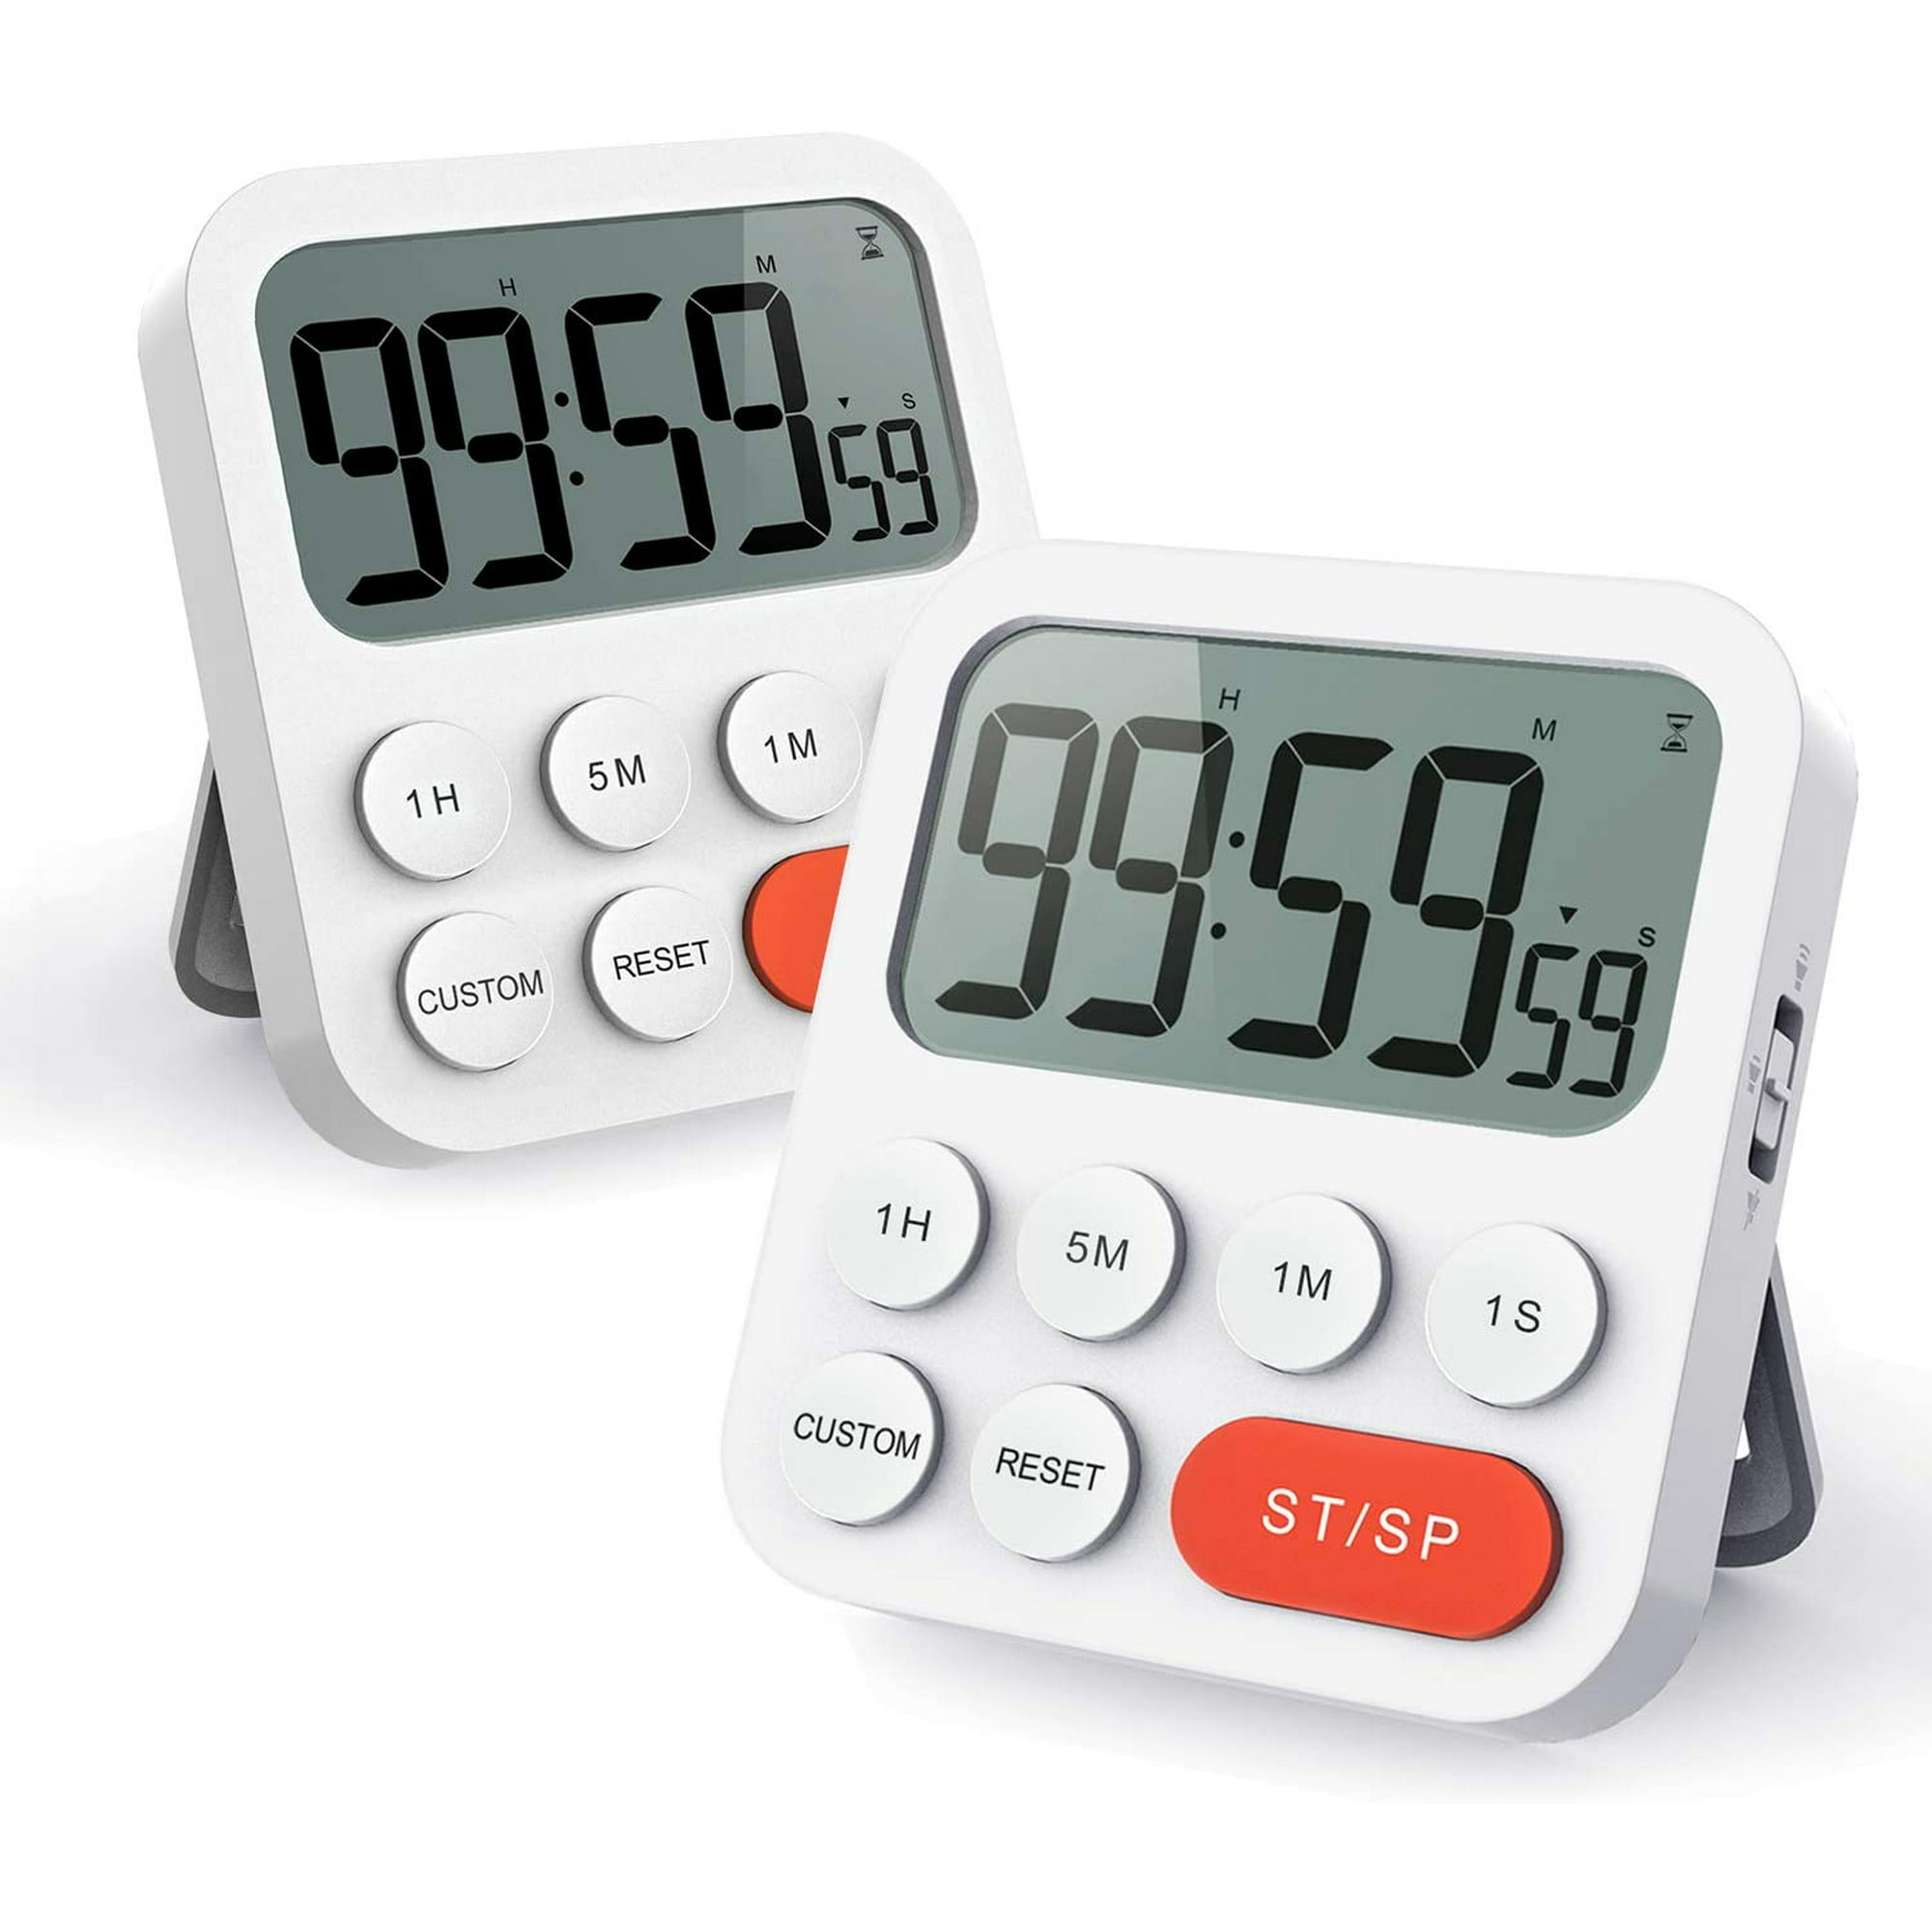 ThermoPro TM02W Digital Kitchen Timer with Adjustable Loud Alarm